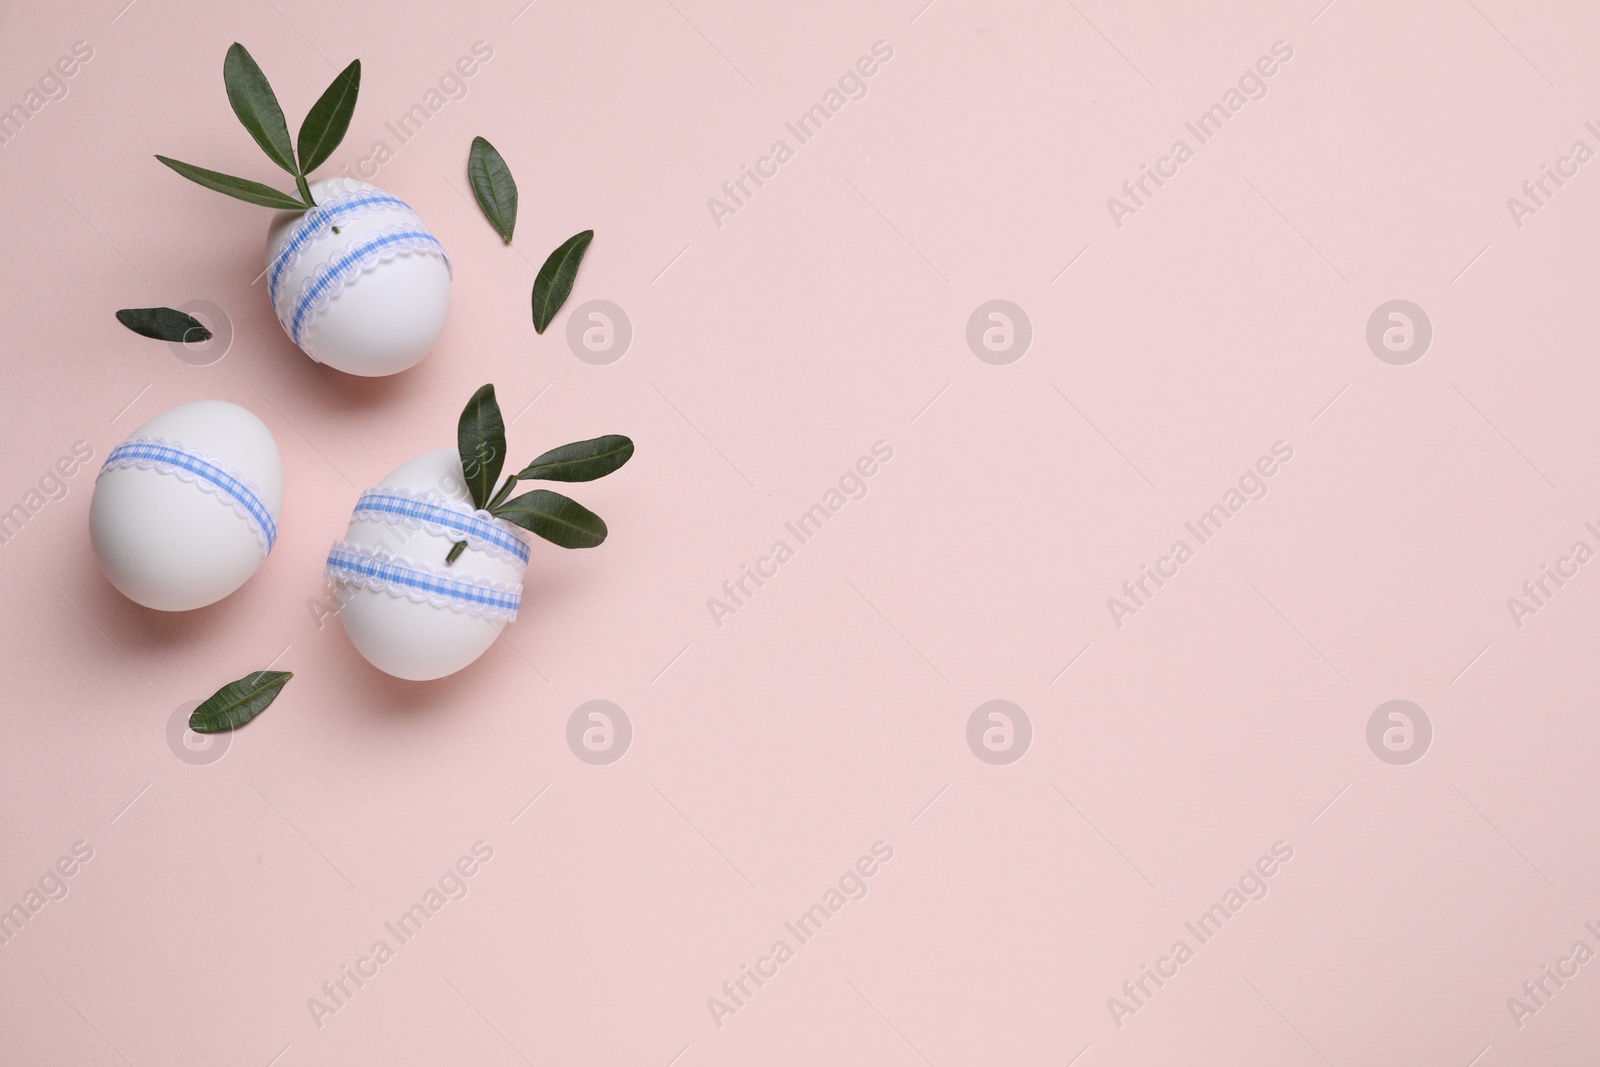 Photo of Beautifully decorated Easter eggs and green leaves on pale pink background, flat lay. Space for text